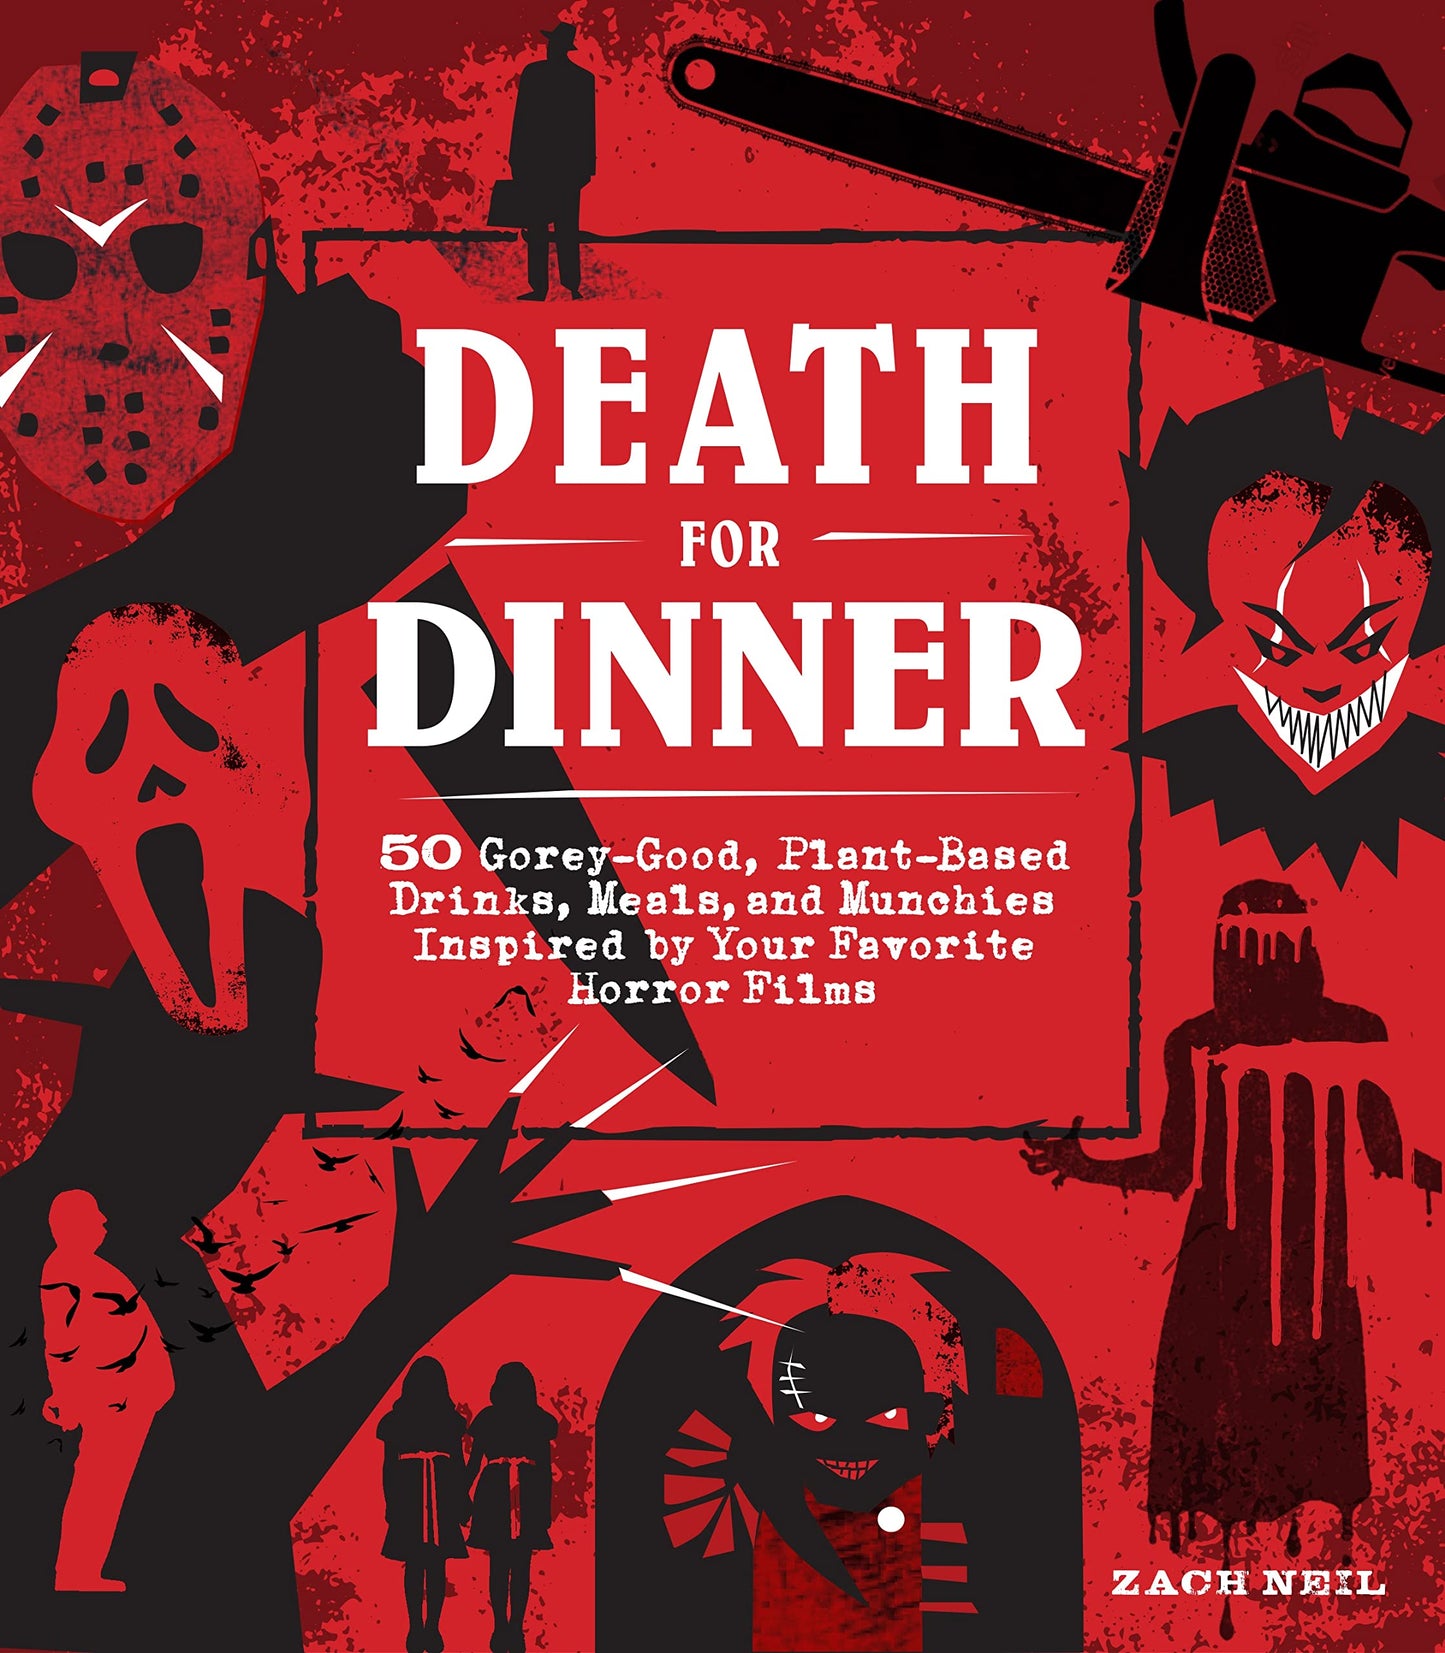 Death For Dinner 60 Drinks, Meals, and Munchies Inspired By Horror Films Cookbook